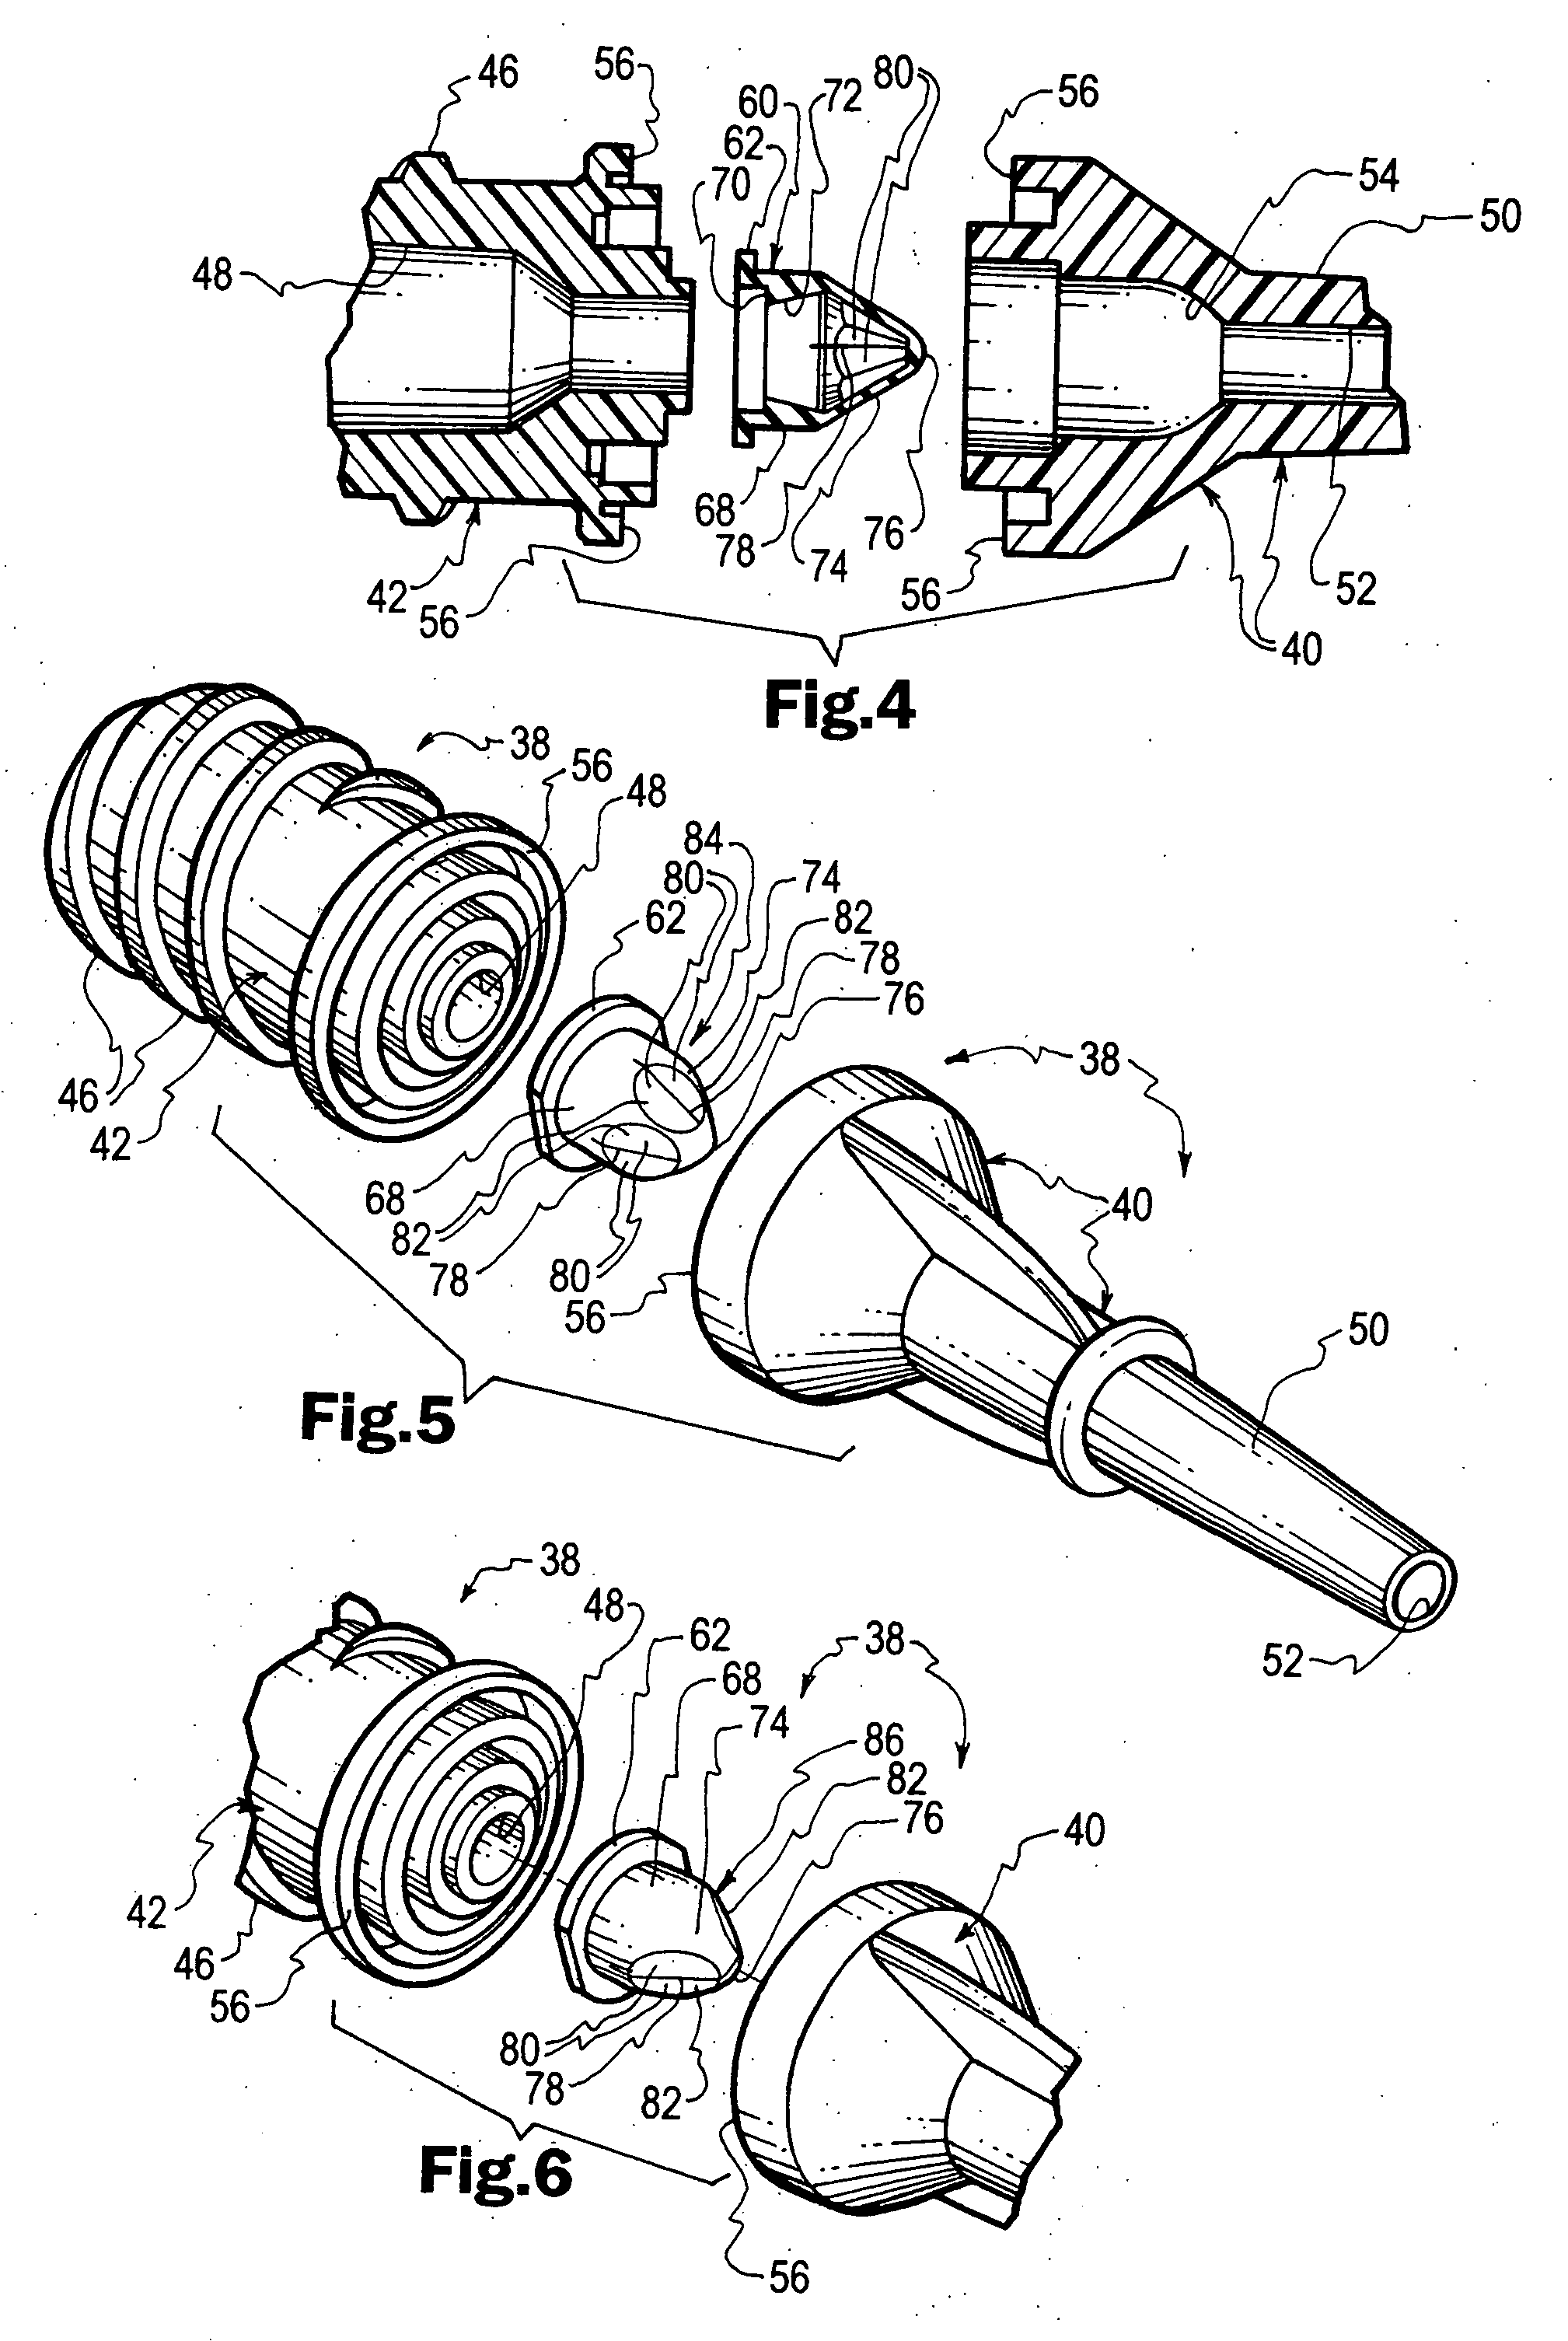 Outdwelling slit valves and assemblies for medical liquid flow through a cannula and related methods